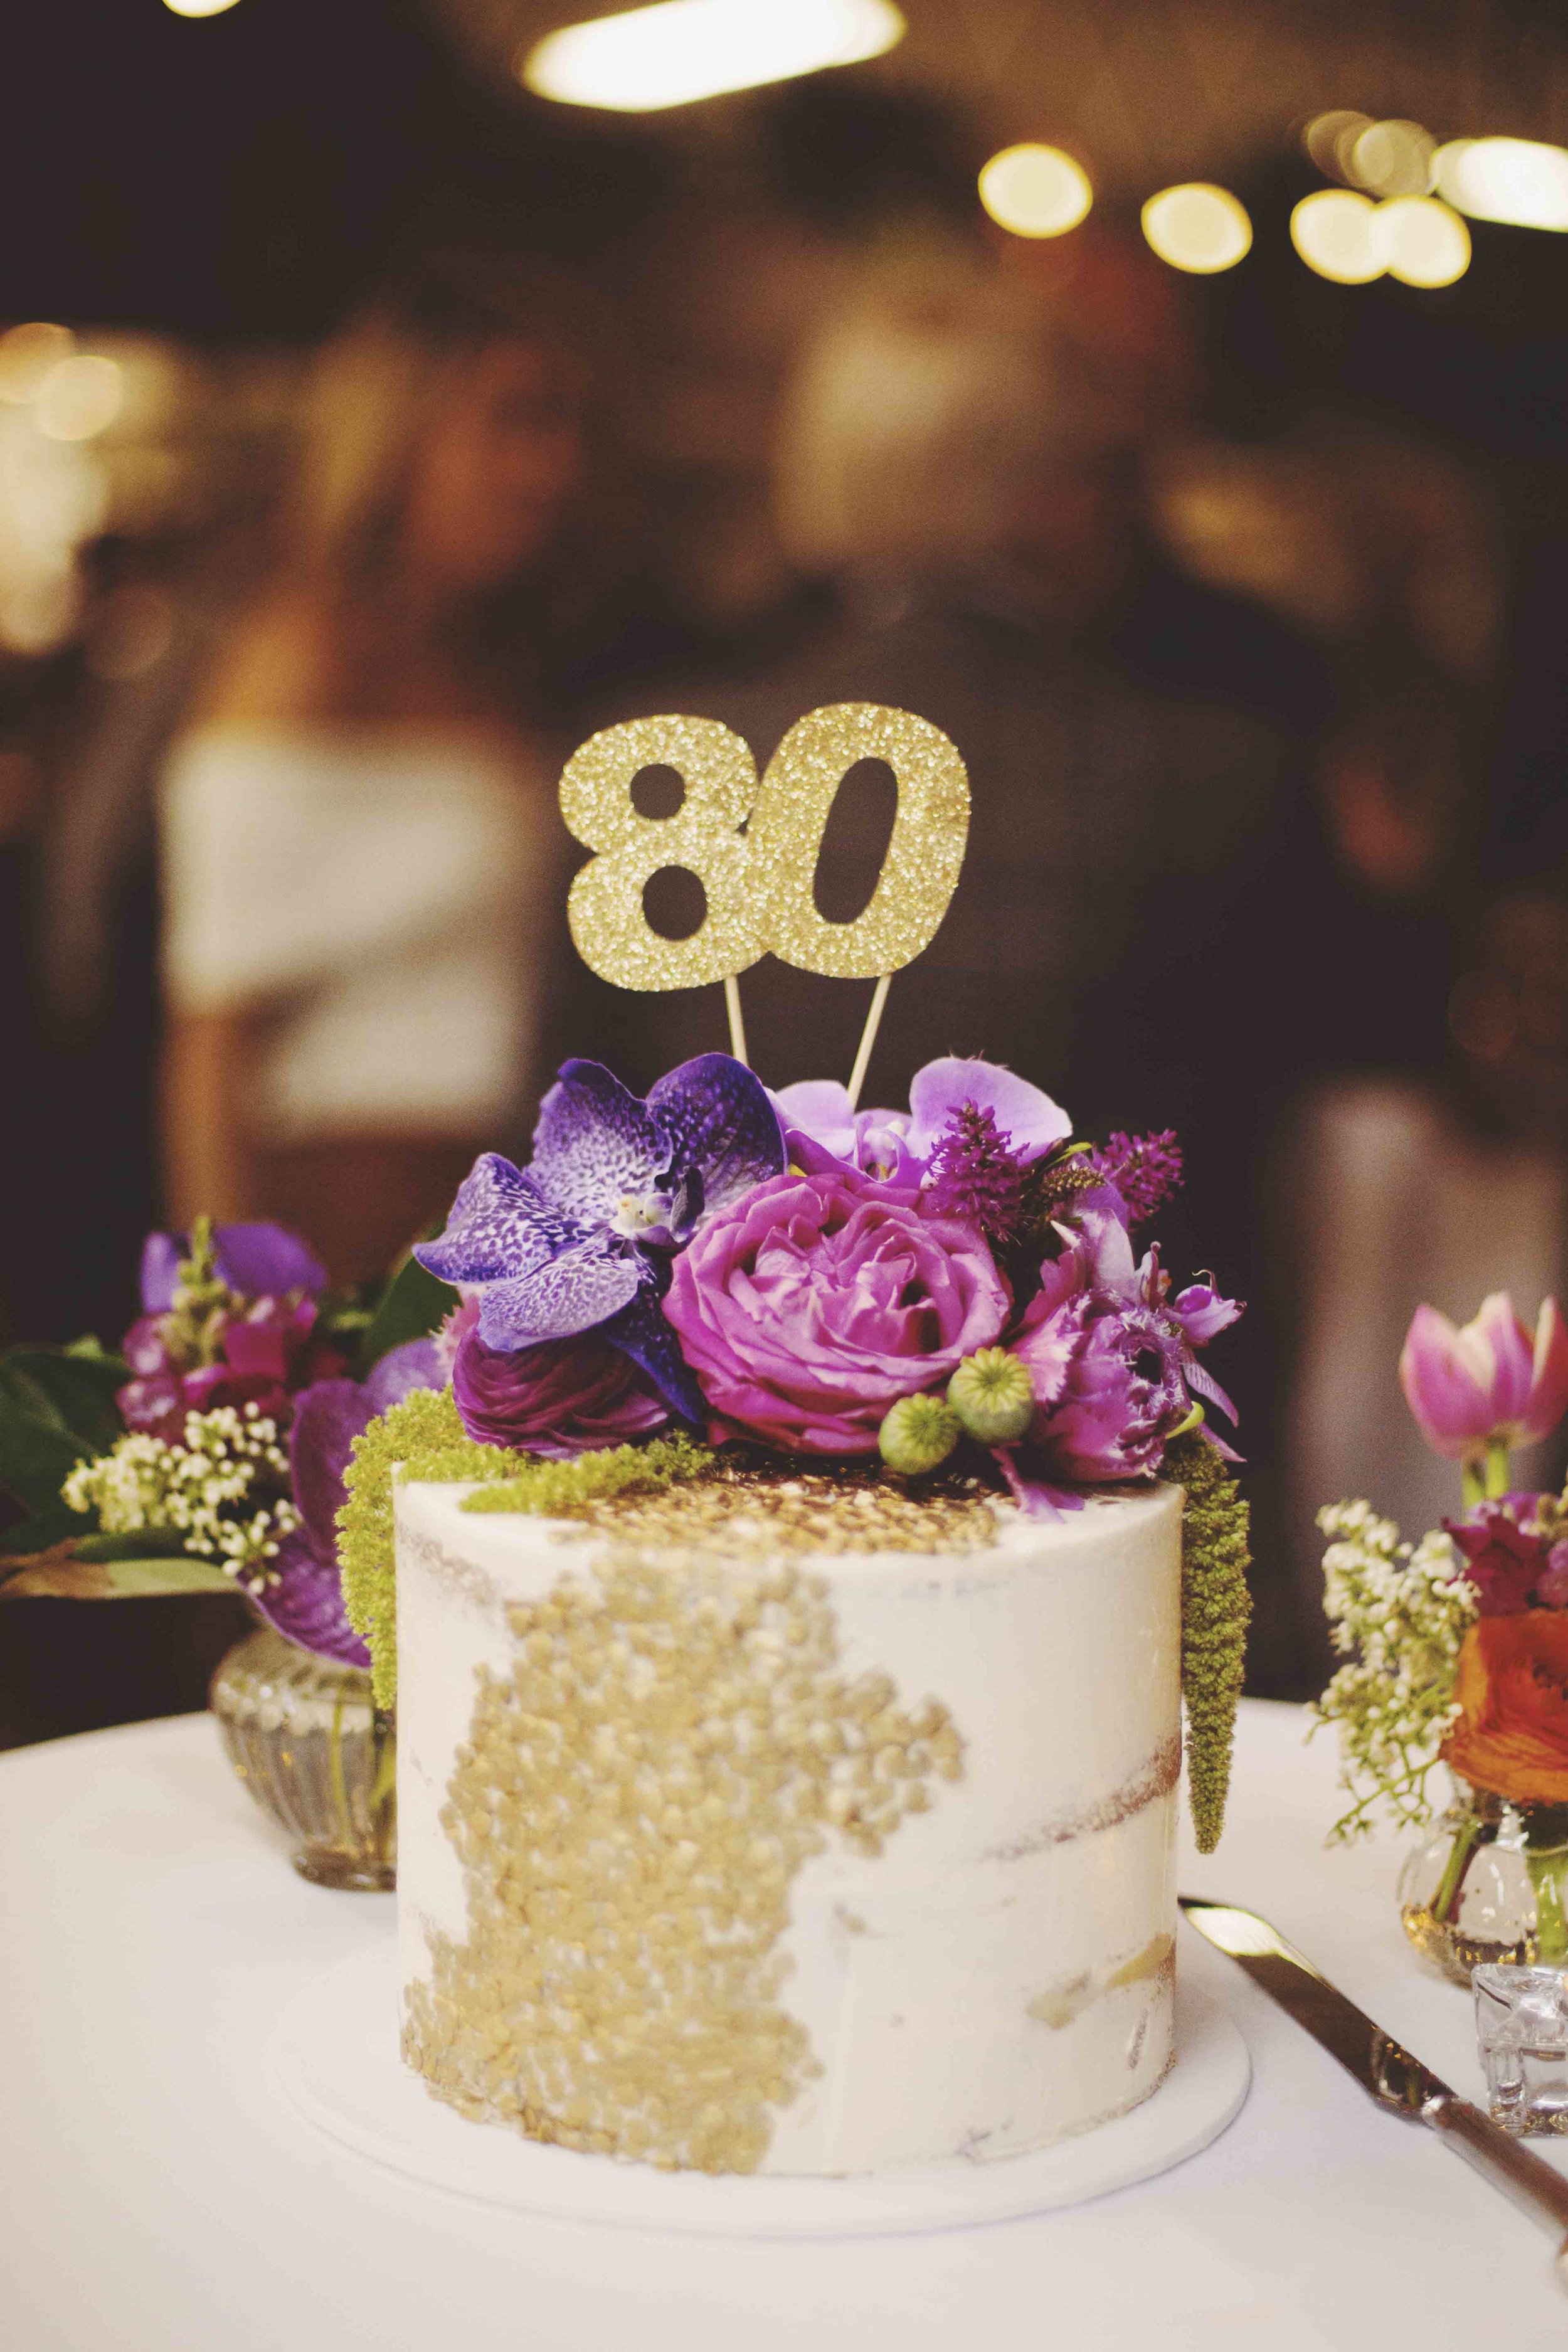 80th birthday party event photography captured in Sydney by The Paper Fox